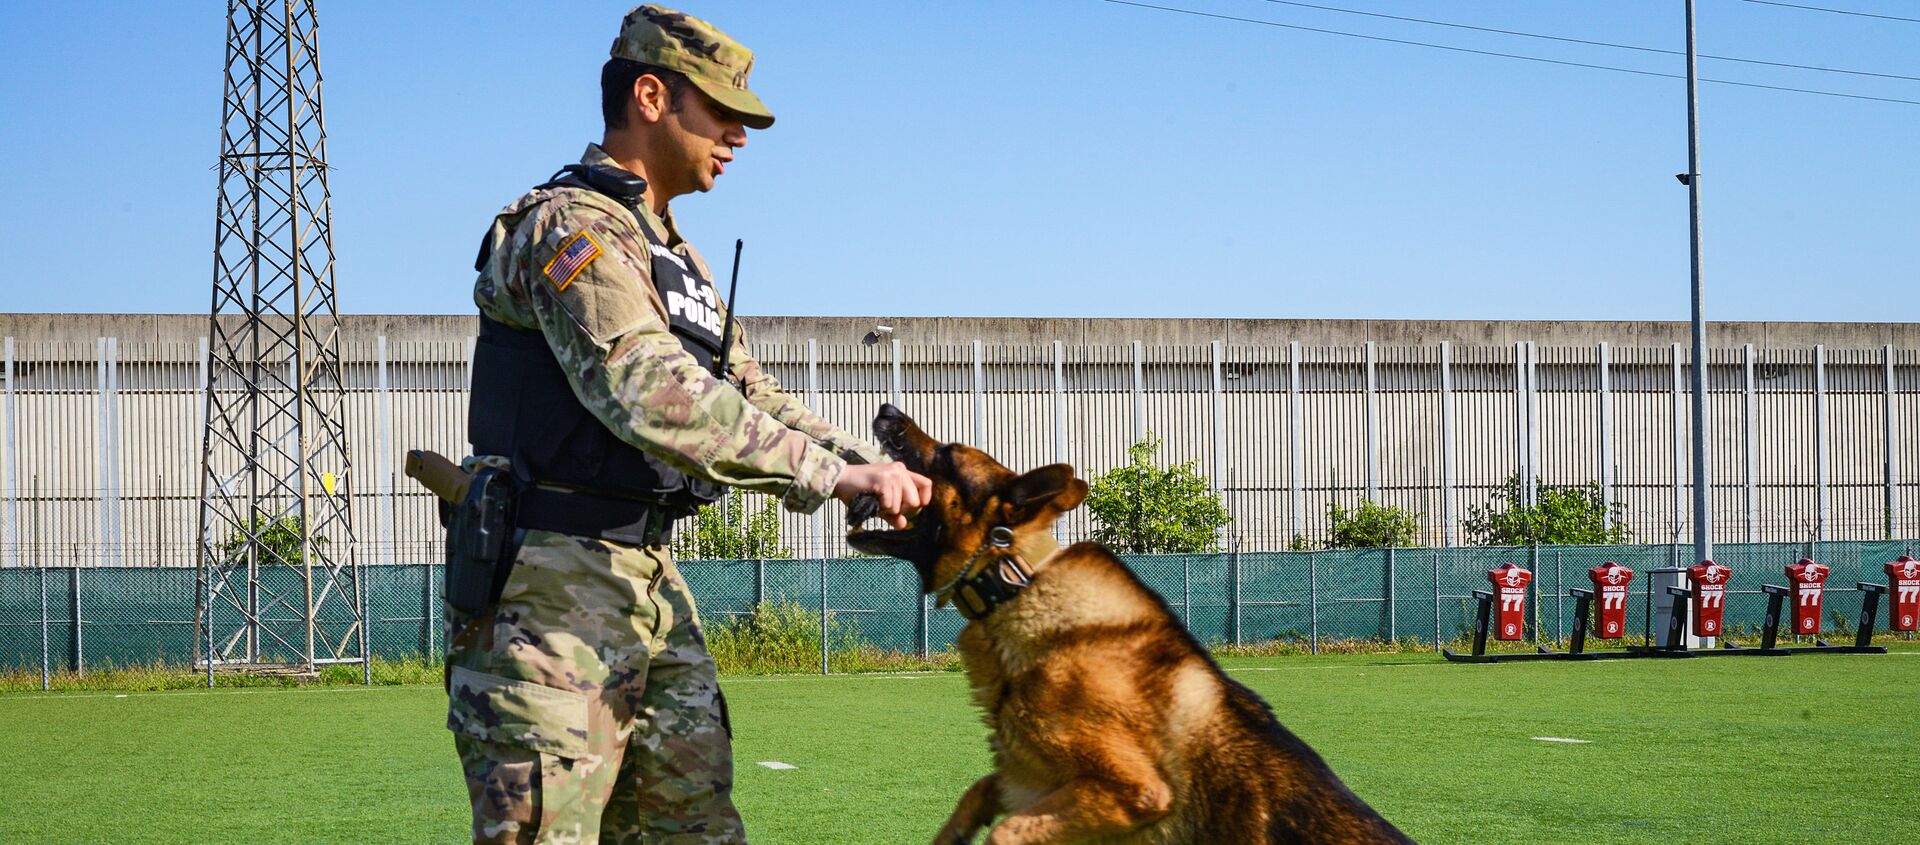 U.S. Army Sgt. Patrick Harrington, Soldier assigned to the USAG Italy 18th Military Police Detachment, conducts basic obedience drills with his military working dog “Aran”, under Covid-19 prevention condition at Caserma Ederle in Vicenza, Italy, on May 14, 2020 - Sputnik International, 1920